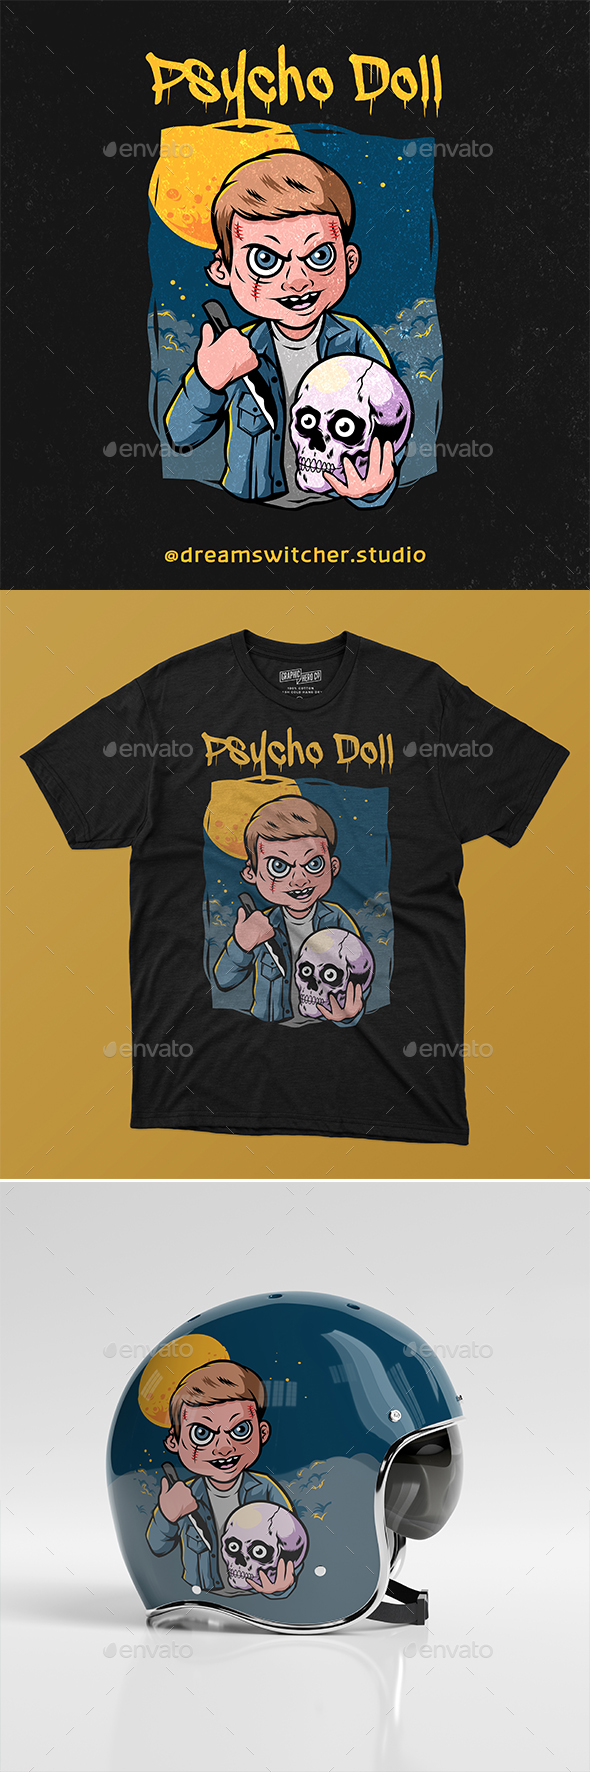 [DOWNLOAD]Psycho Doll